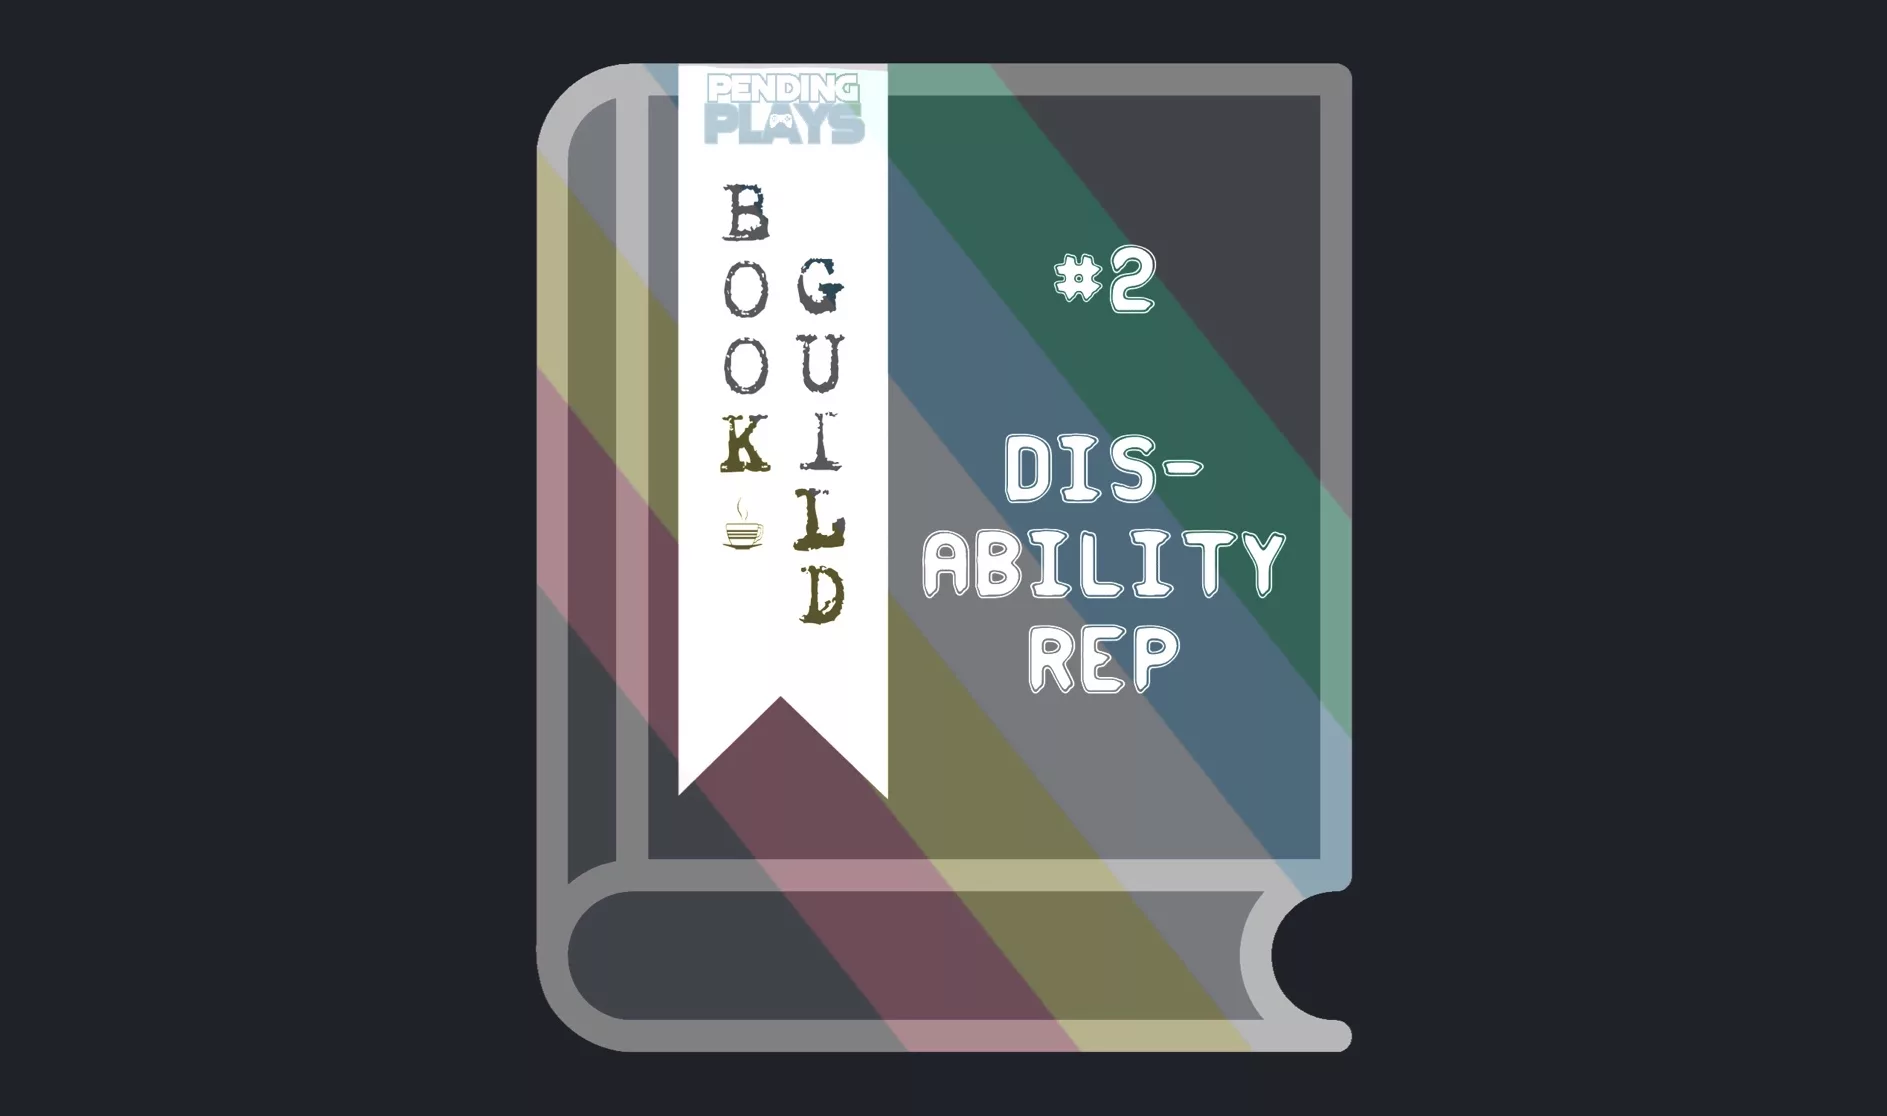 A book icon with the disability pride flag as its cover. A bookmark on the left side of the book, with the Pending Plays logo at the top and "Book Guild" in vertical format below. On the right of the book it says "#2 Disability Rep" in a caps-log font.